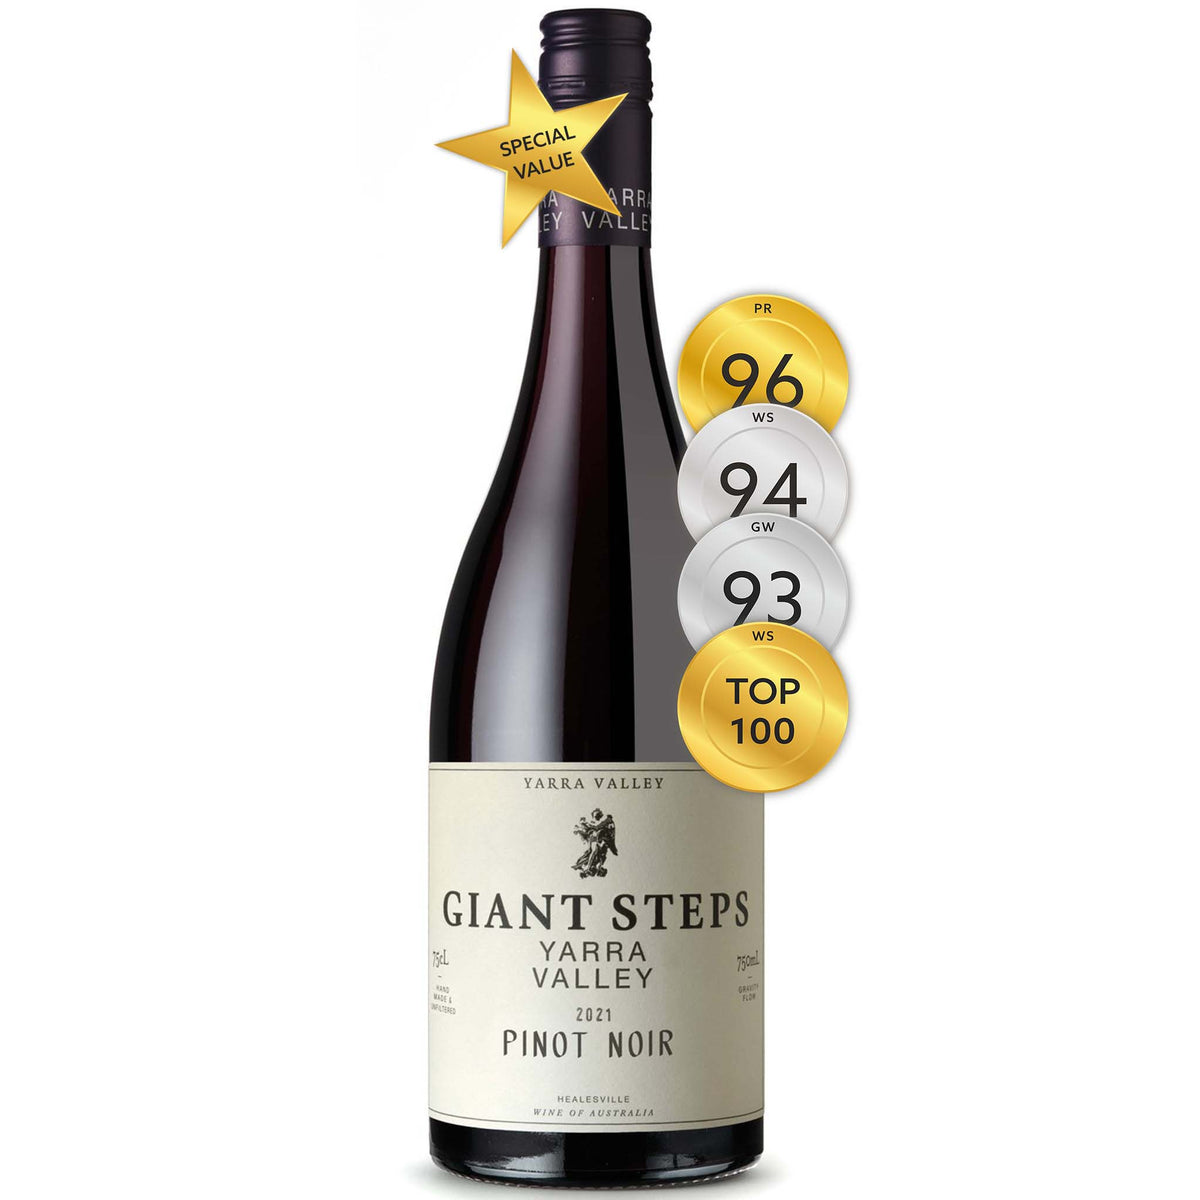 giant-steps-yarra-valley-pinot-noir-2021